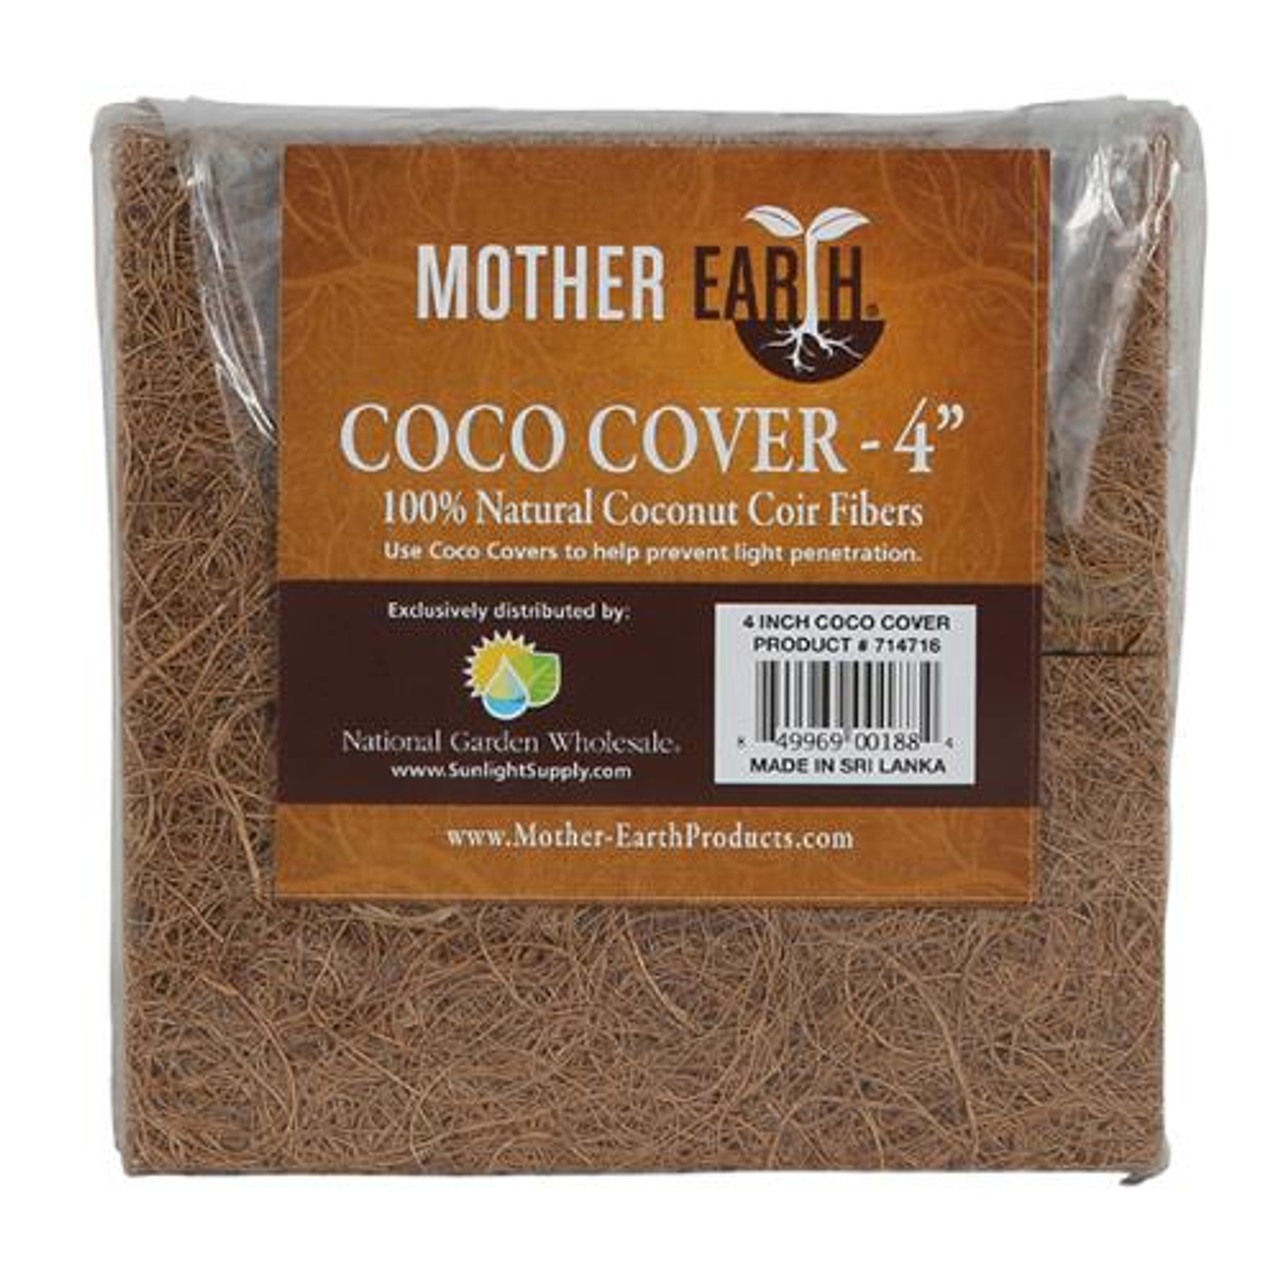 Mother Earth 4" Coco Covers, Pack of 10